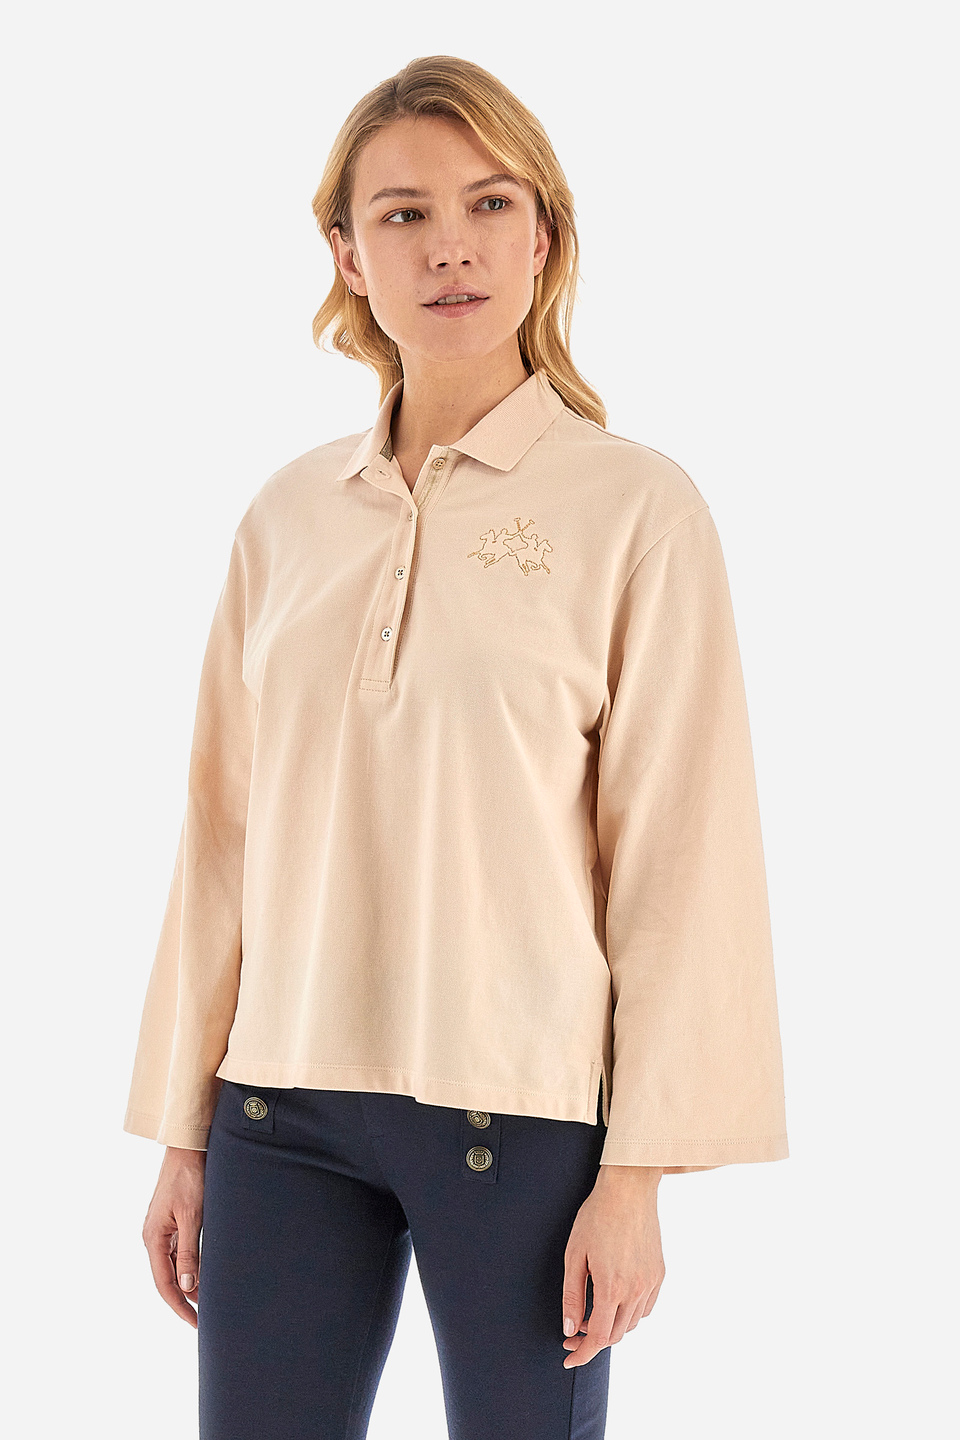 Woman polo shirt in regular fit - Welch | La Martina - Official Online Shop